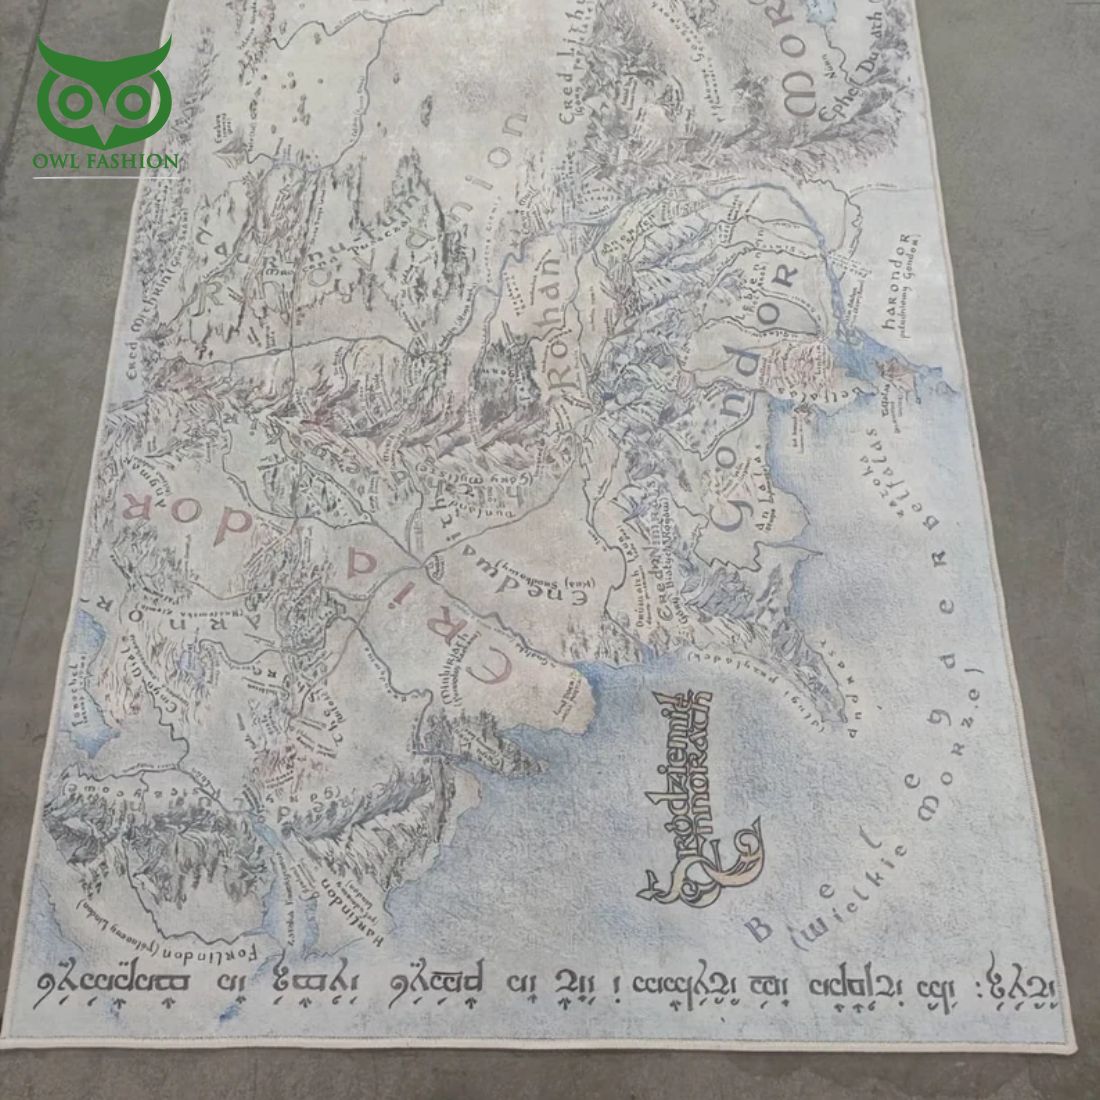 Lord Area Hobbit map Carpet Rug Rug Oh my God you have put on so much!